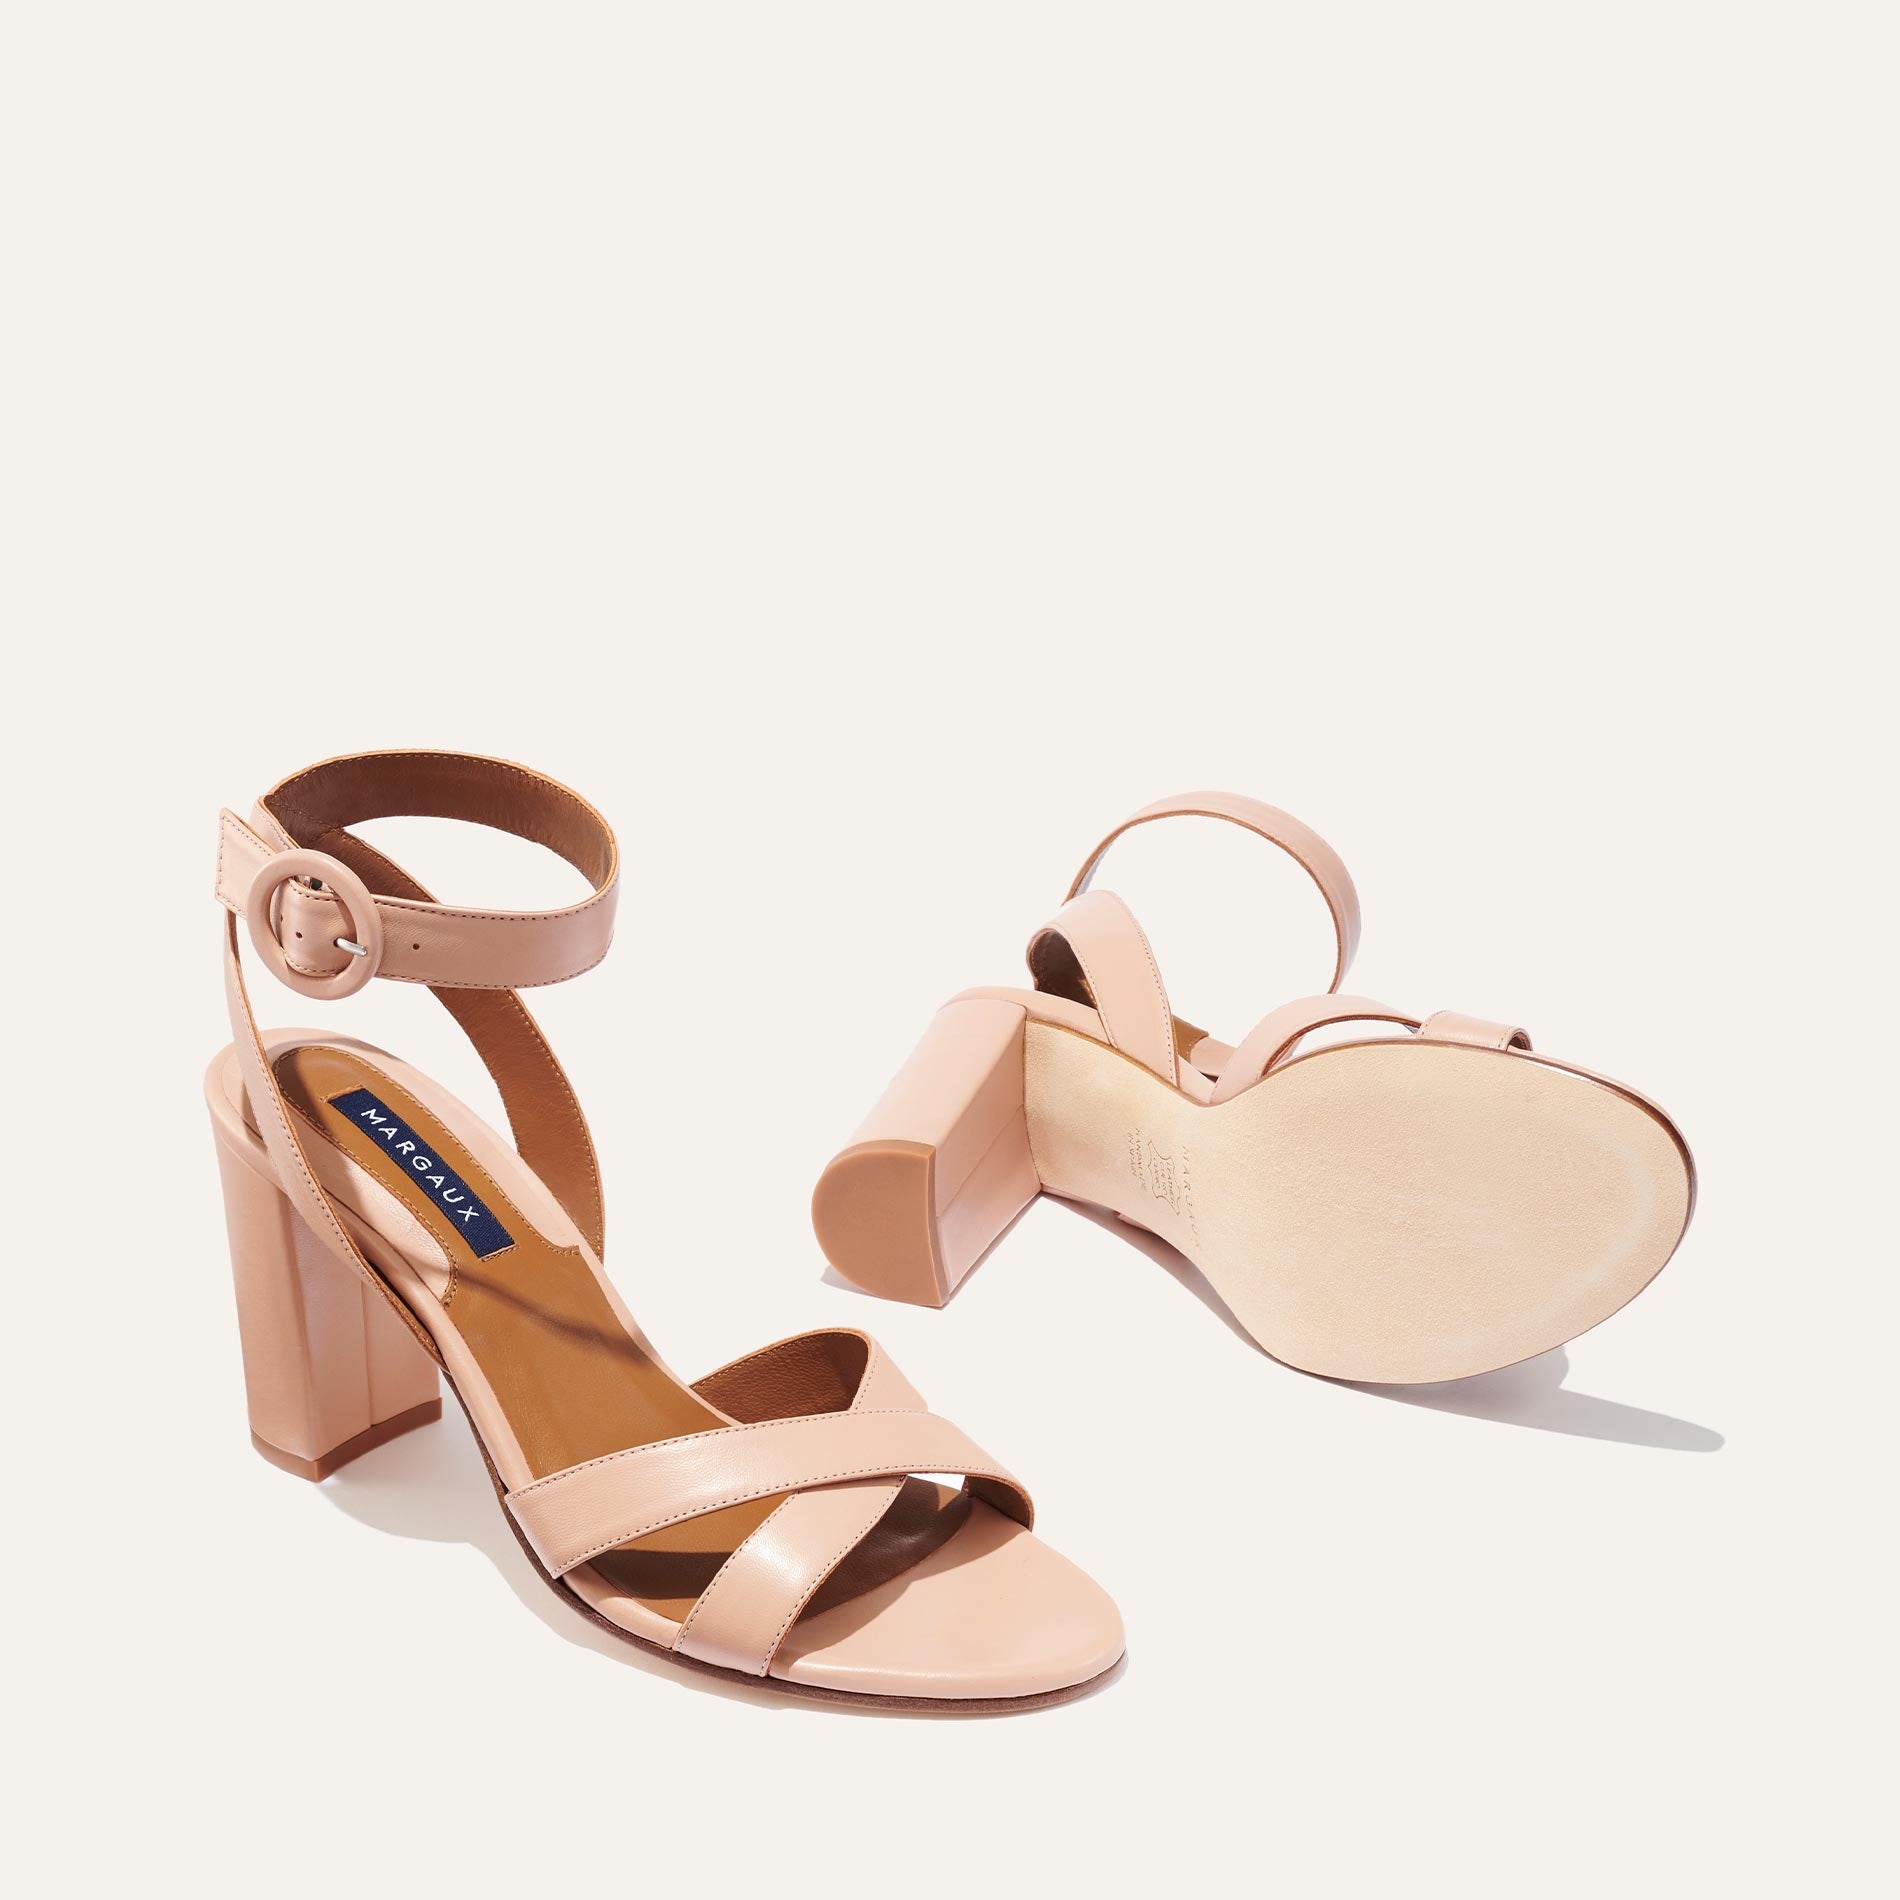 The Uptown Sandal - Rose Nappa